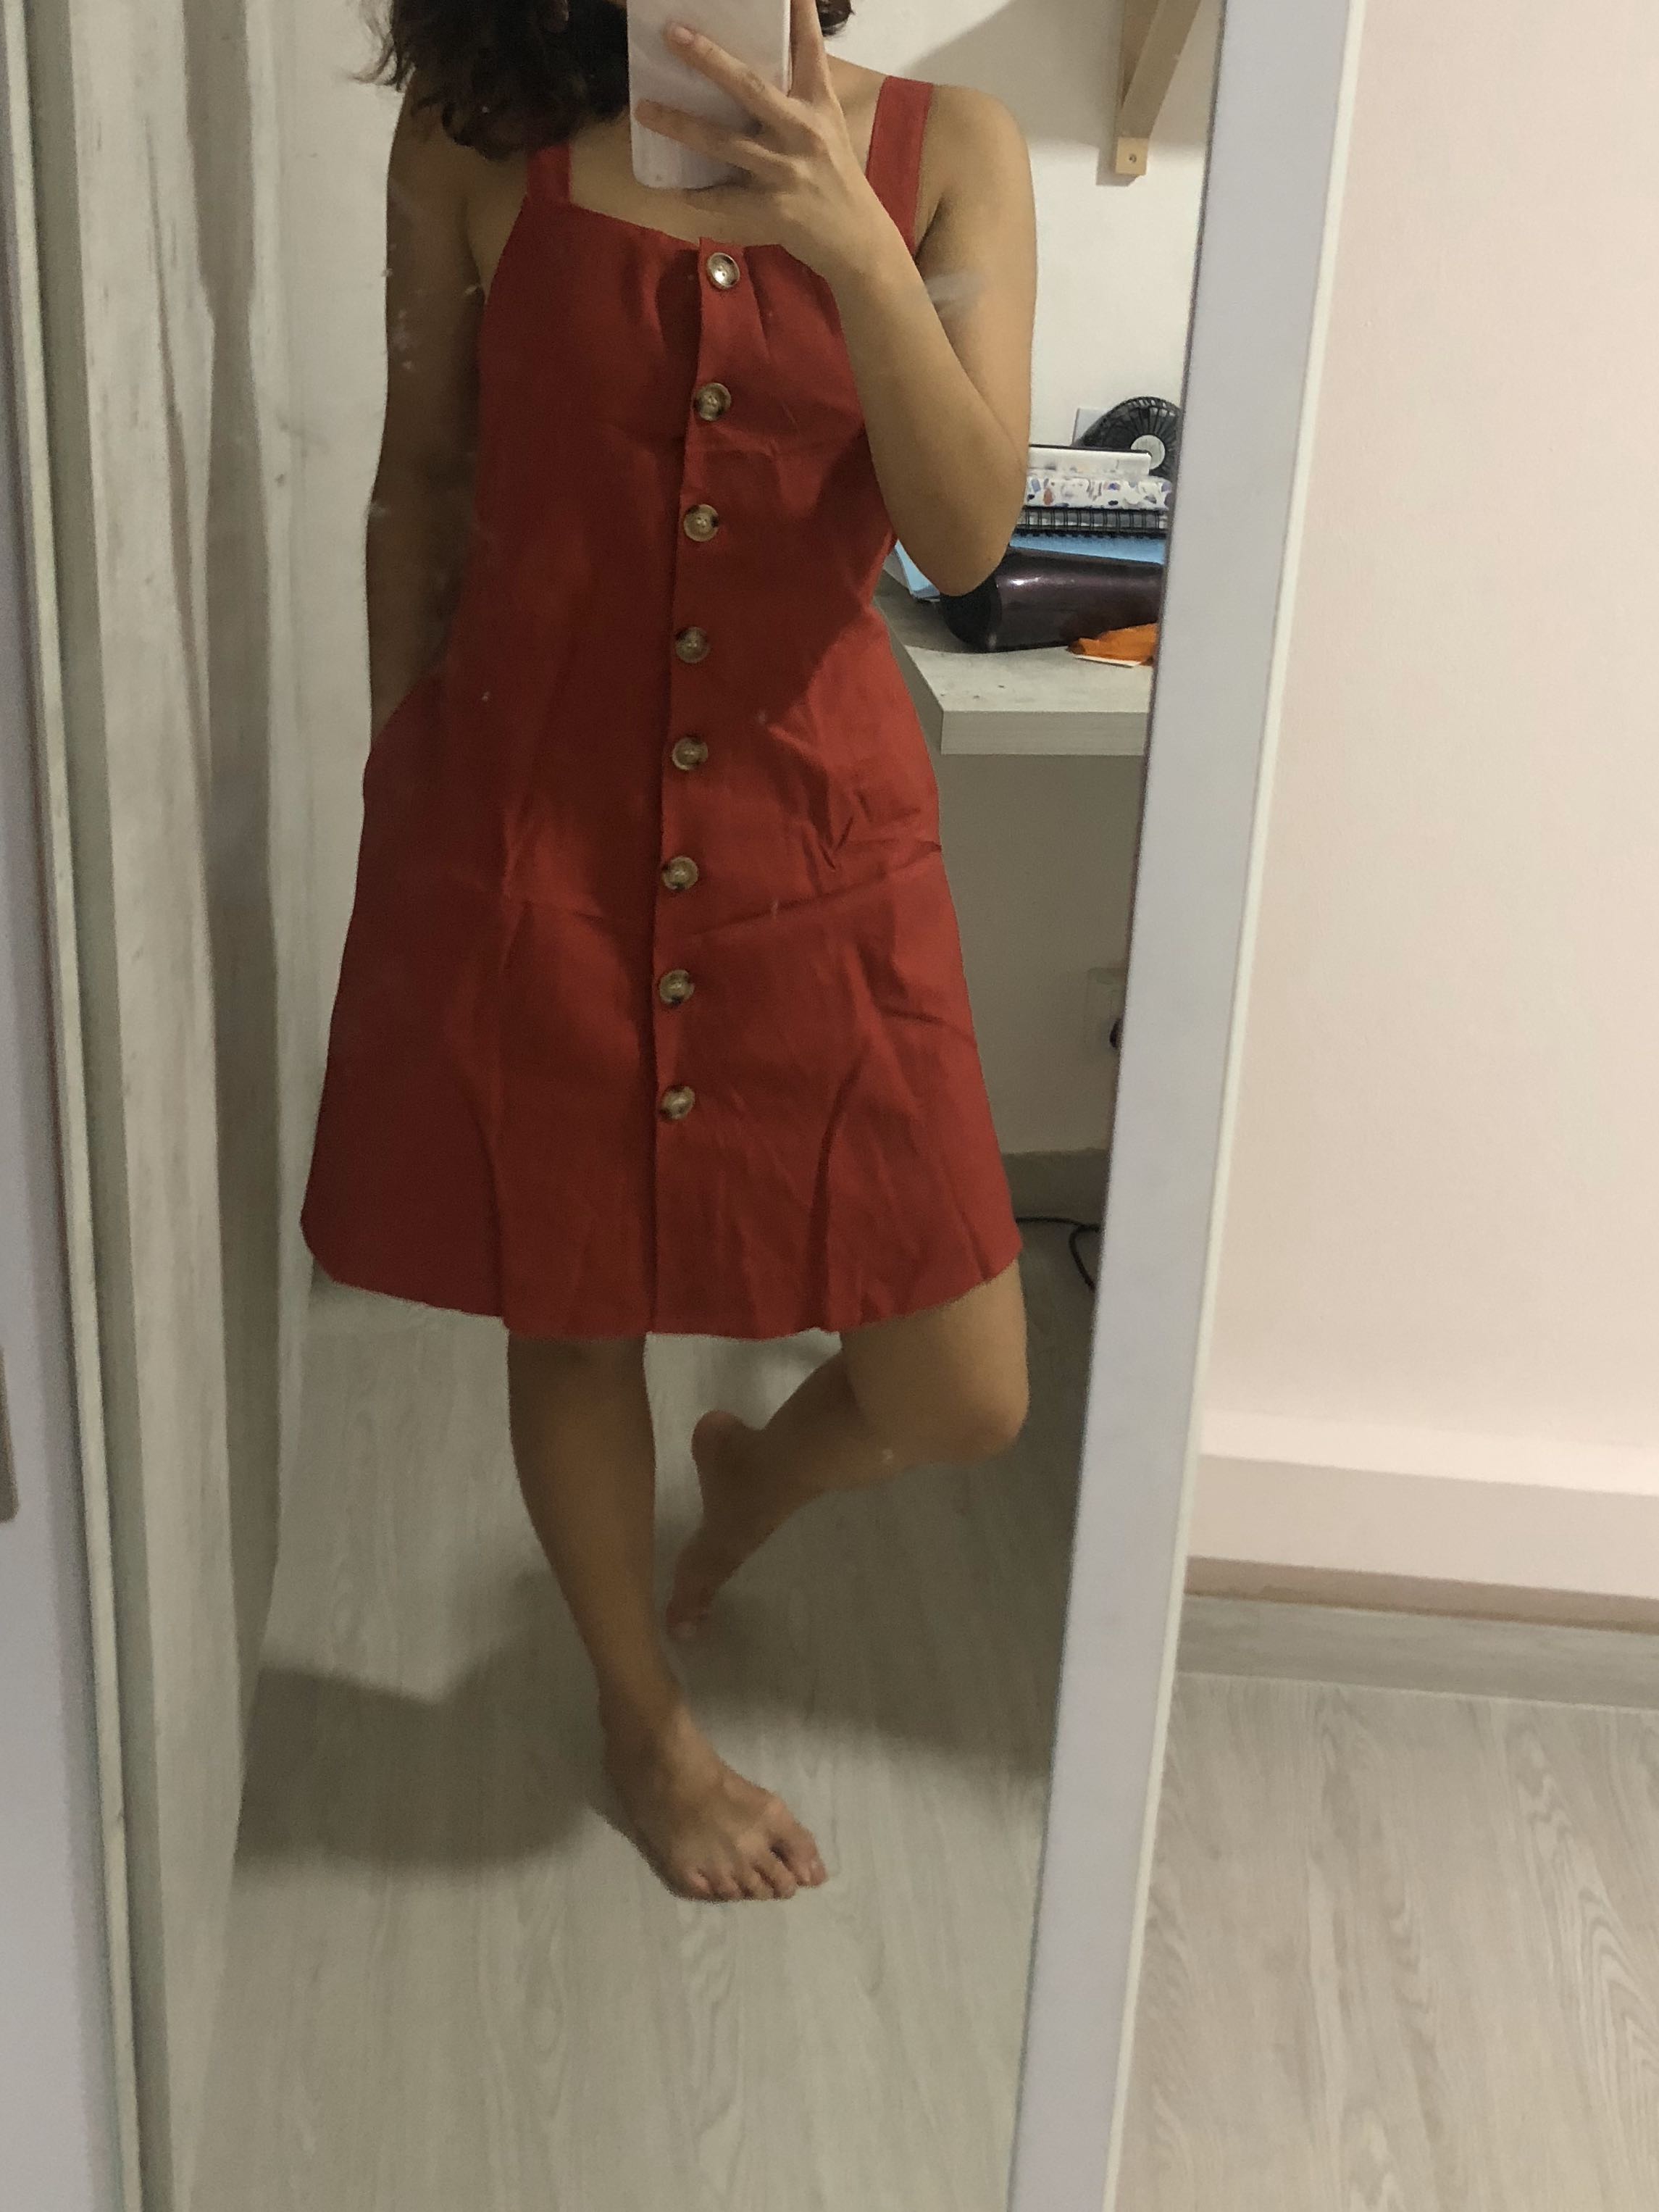 red camisole dress